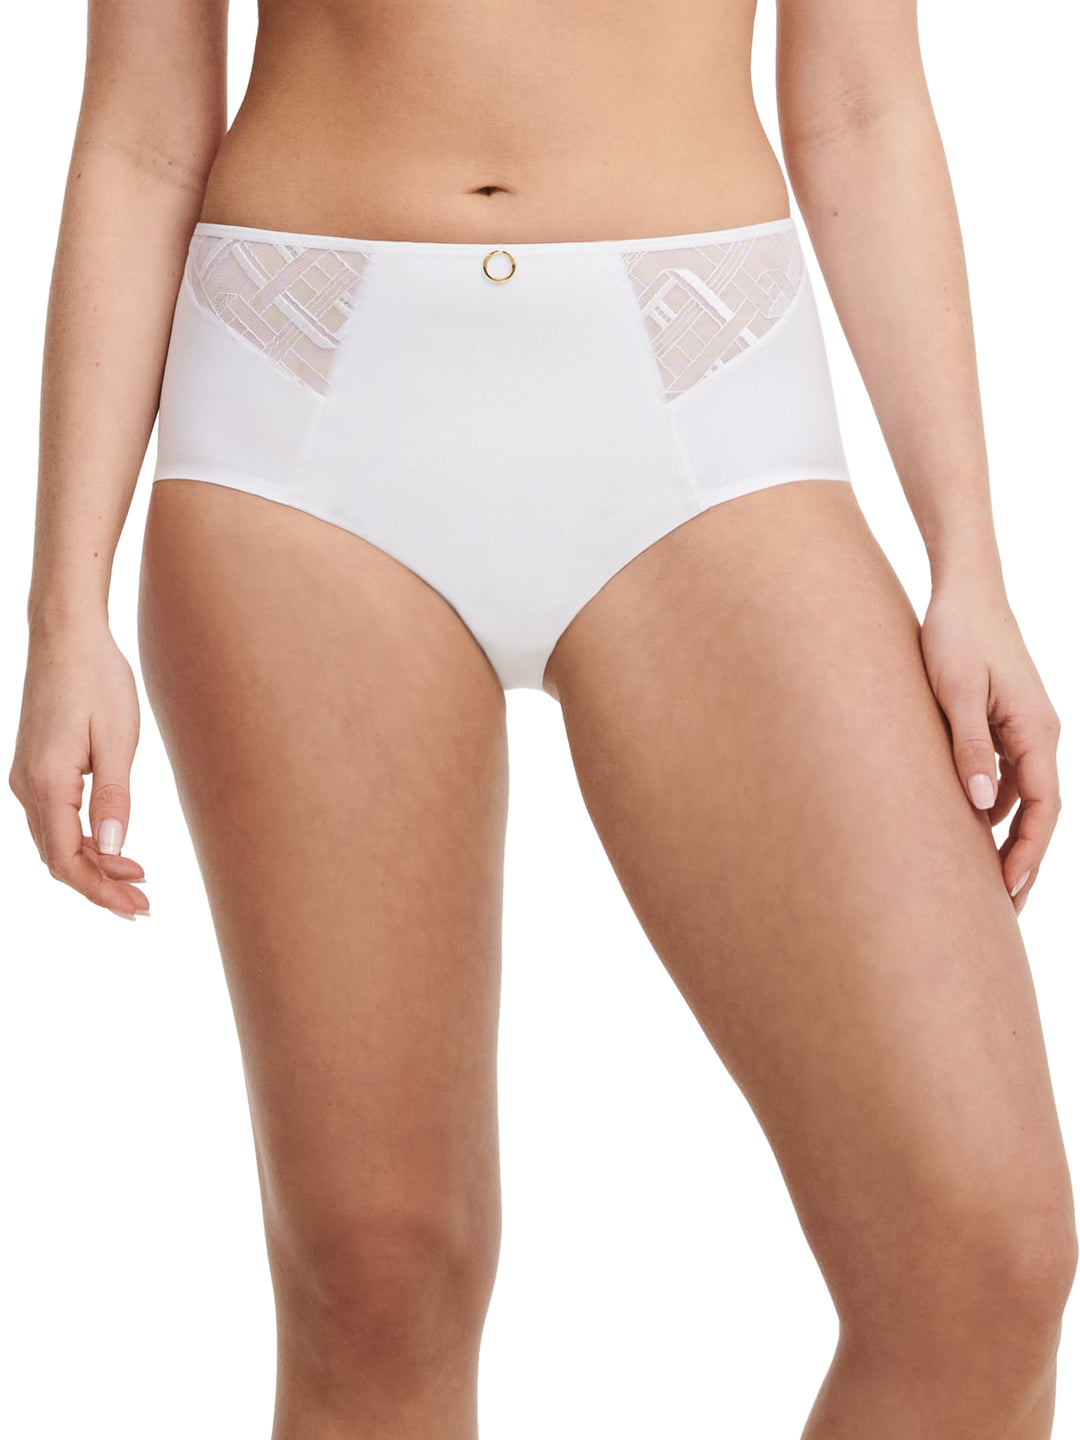 Chantelle - Graphic Support High Waisted Support Full Brief White Full Brief Chantelle 